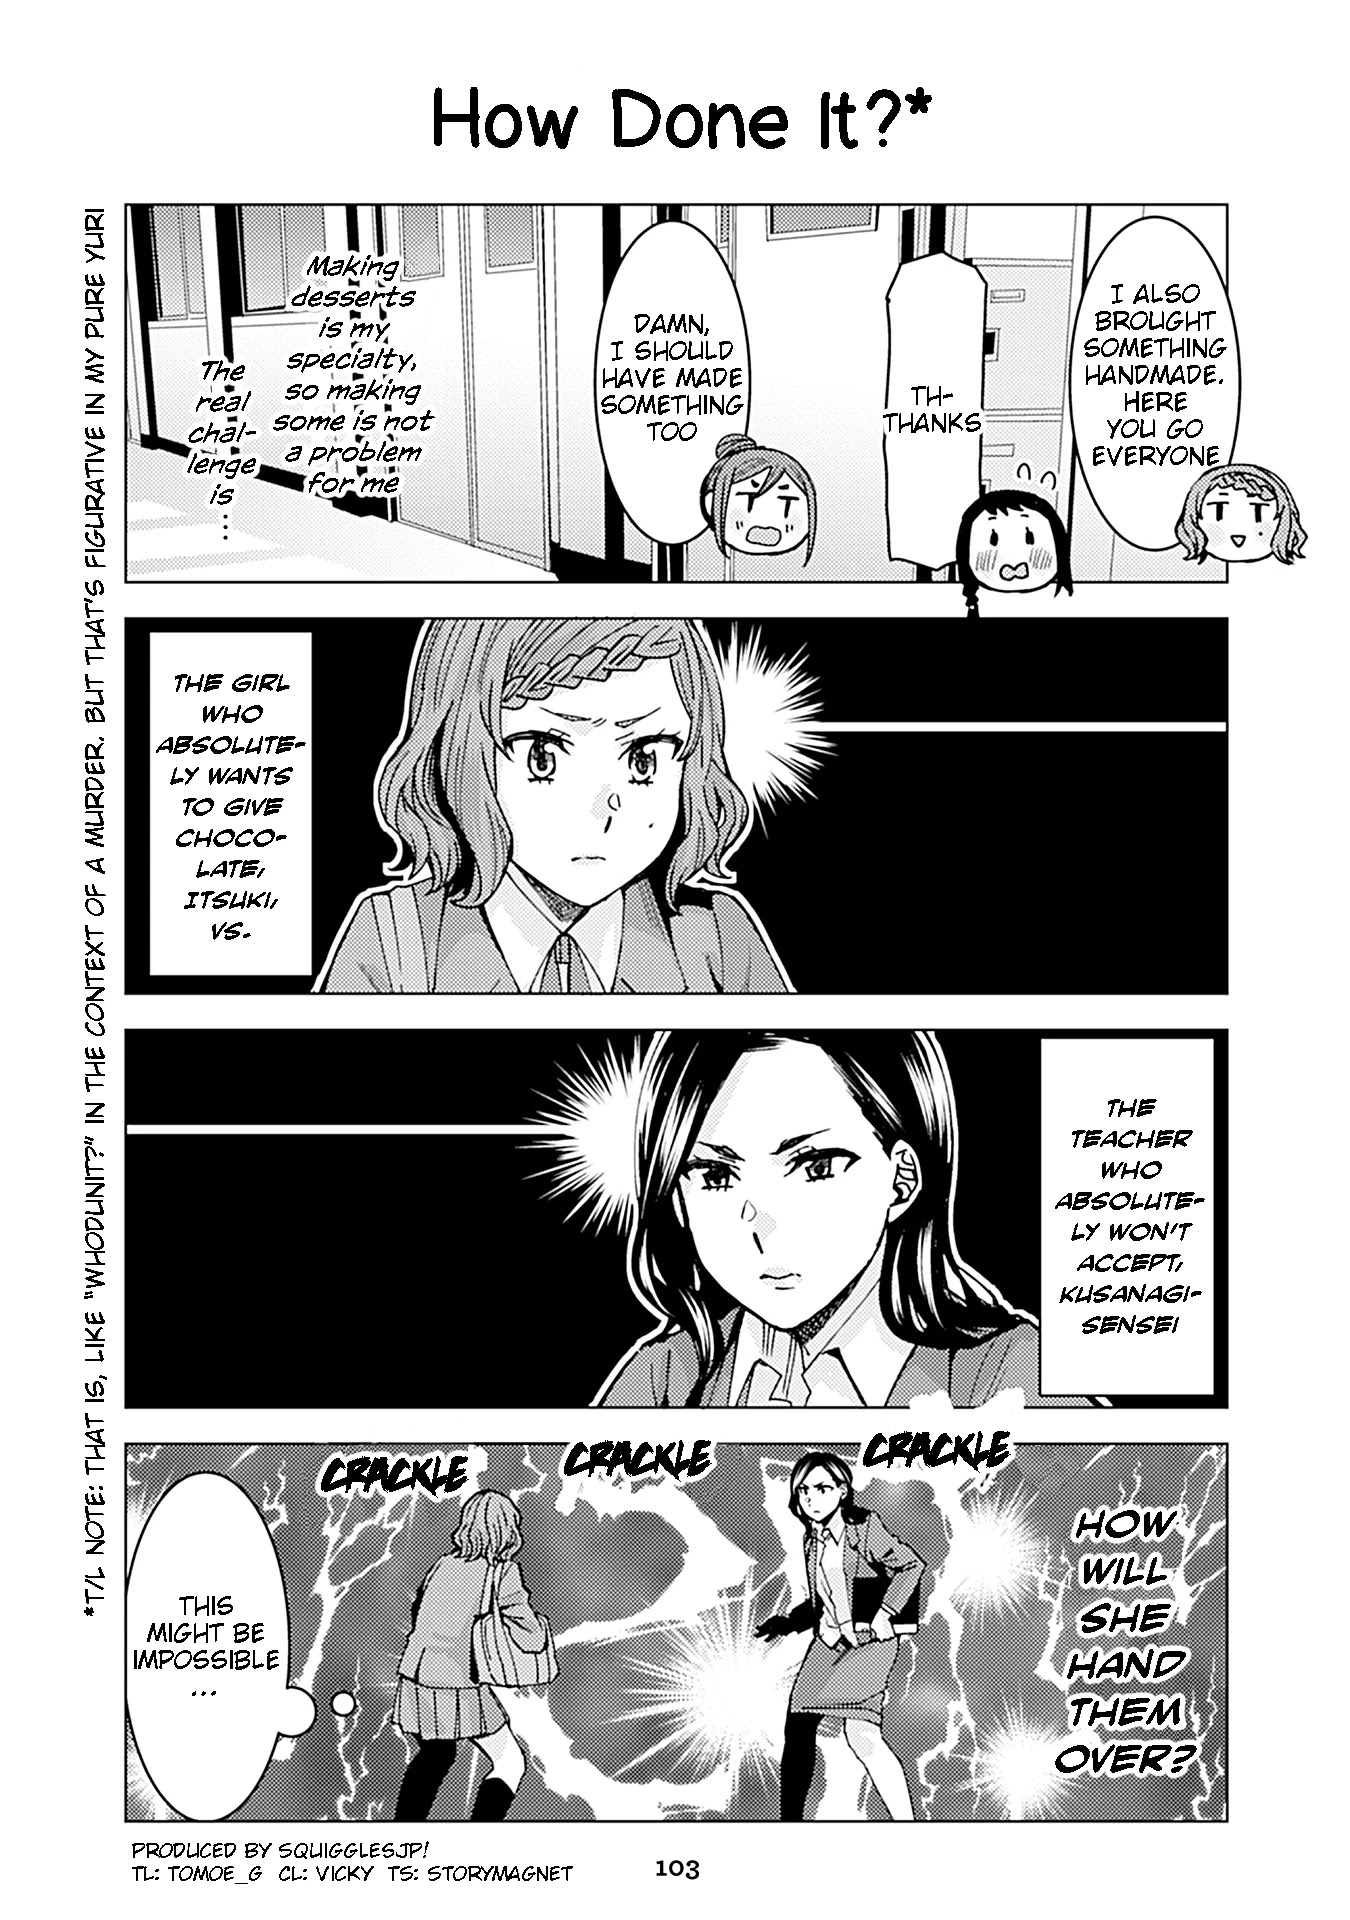 Kusanagi-Sensei Is Being Tested Chapter 209: How Done It?* - Picture 1